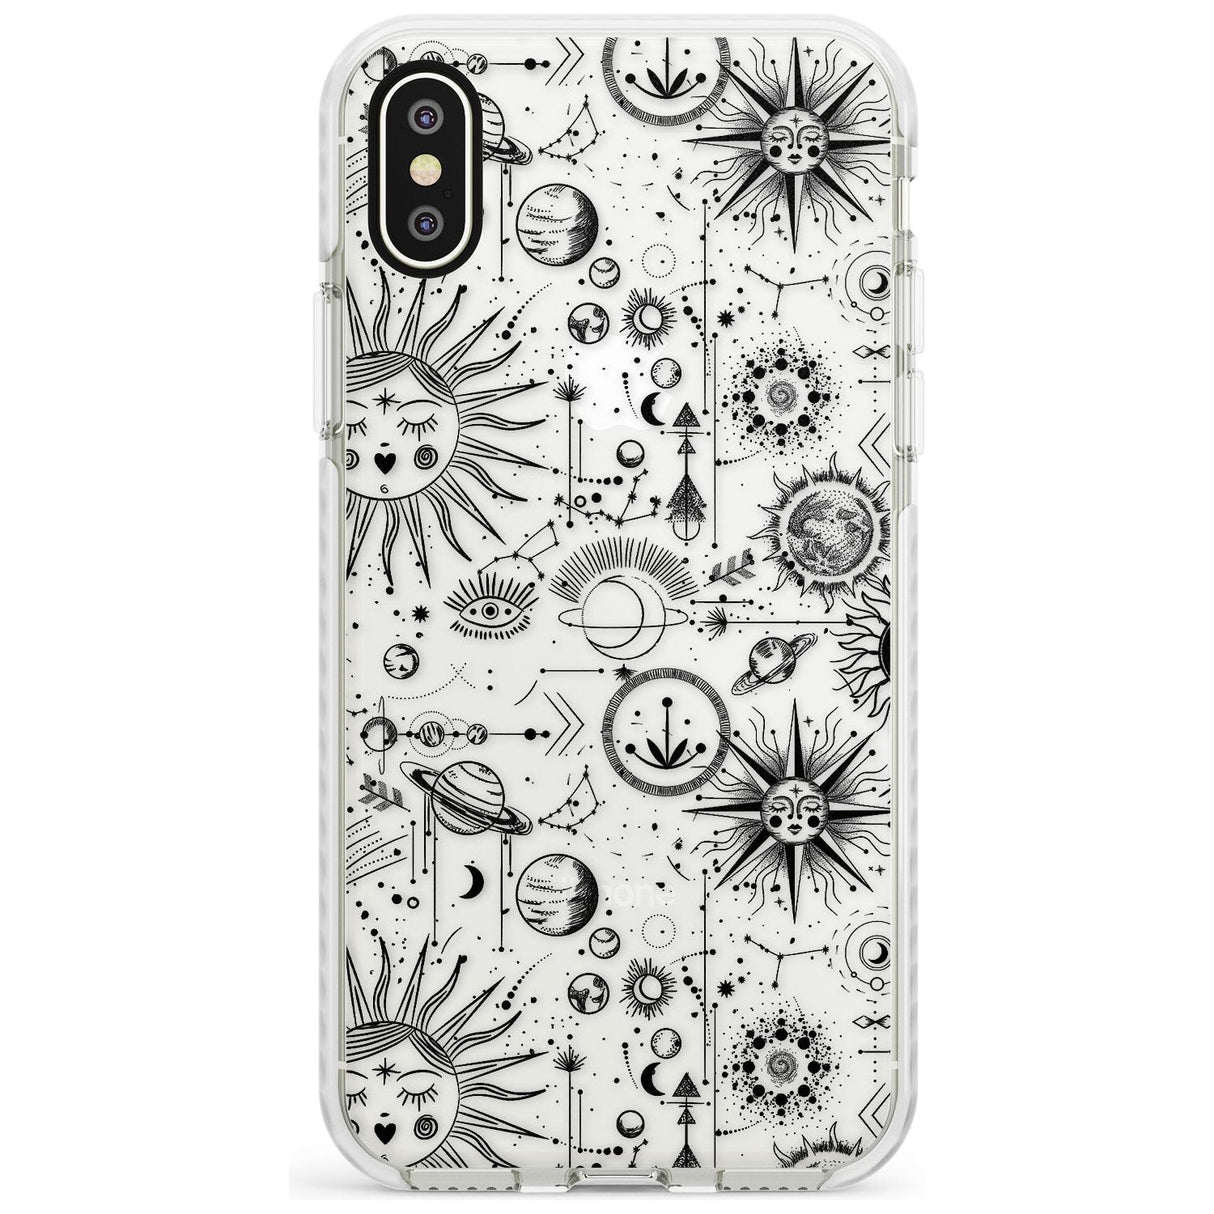 Suns & Planets Vintage Astrological Impact Phone Case for iPhone X XS Max XR